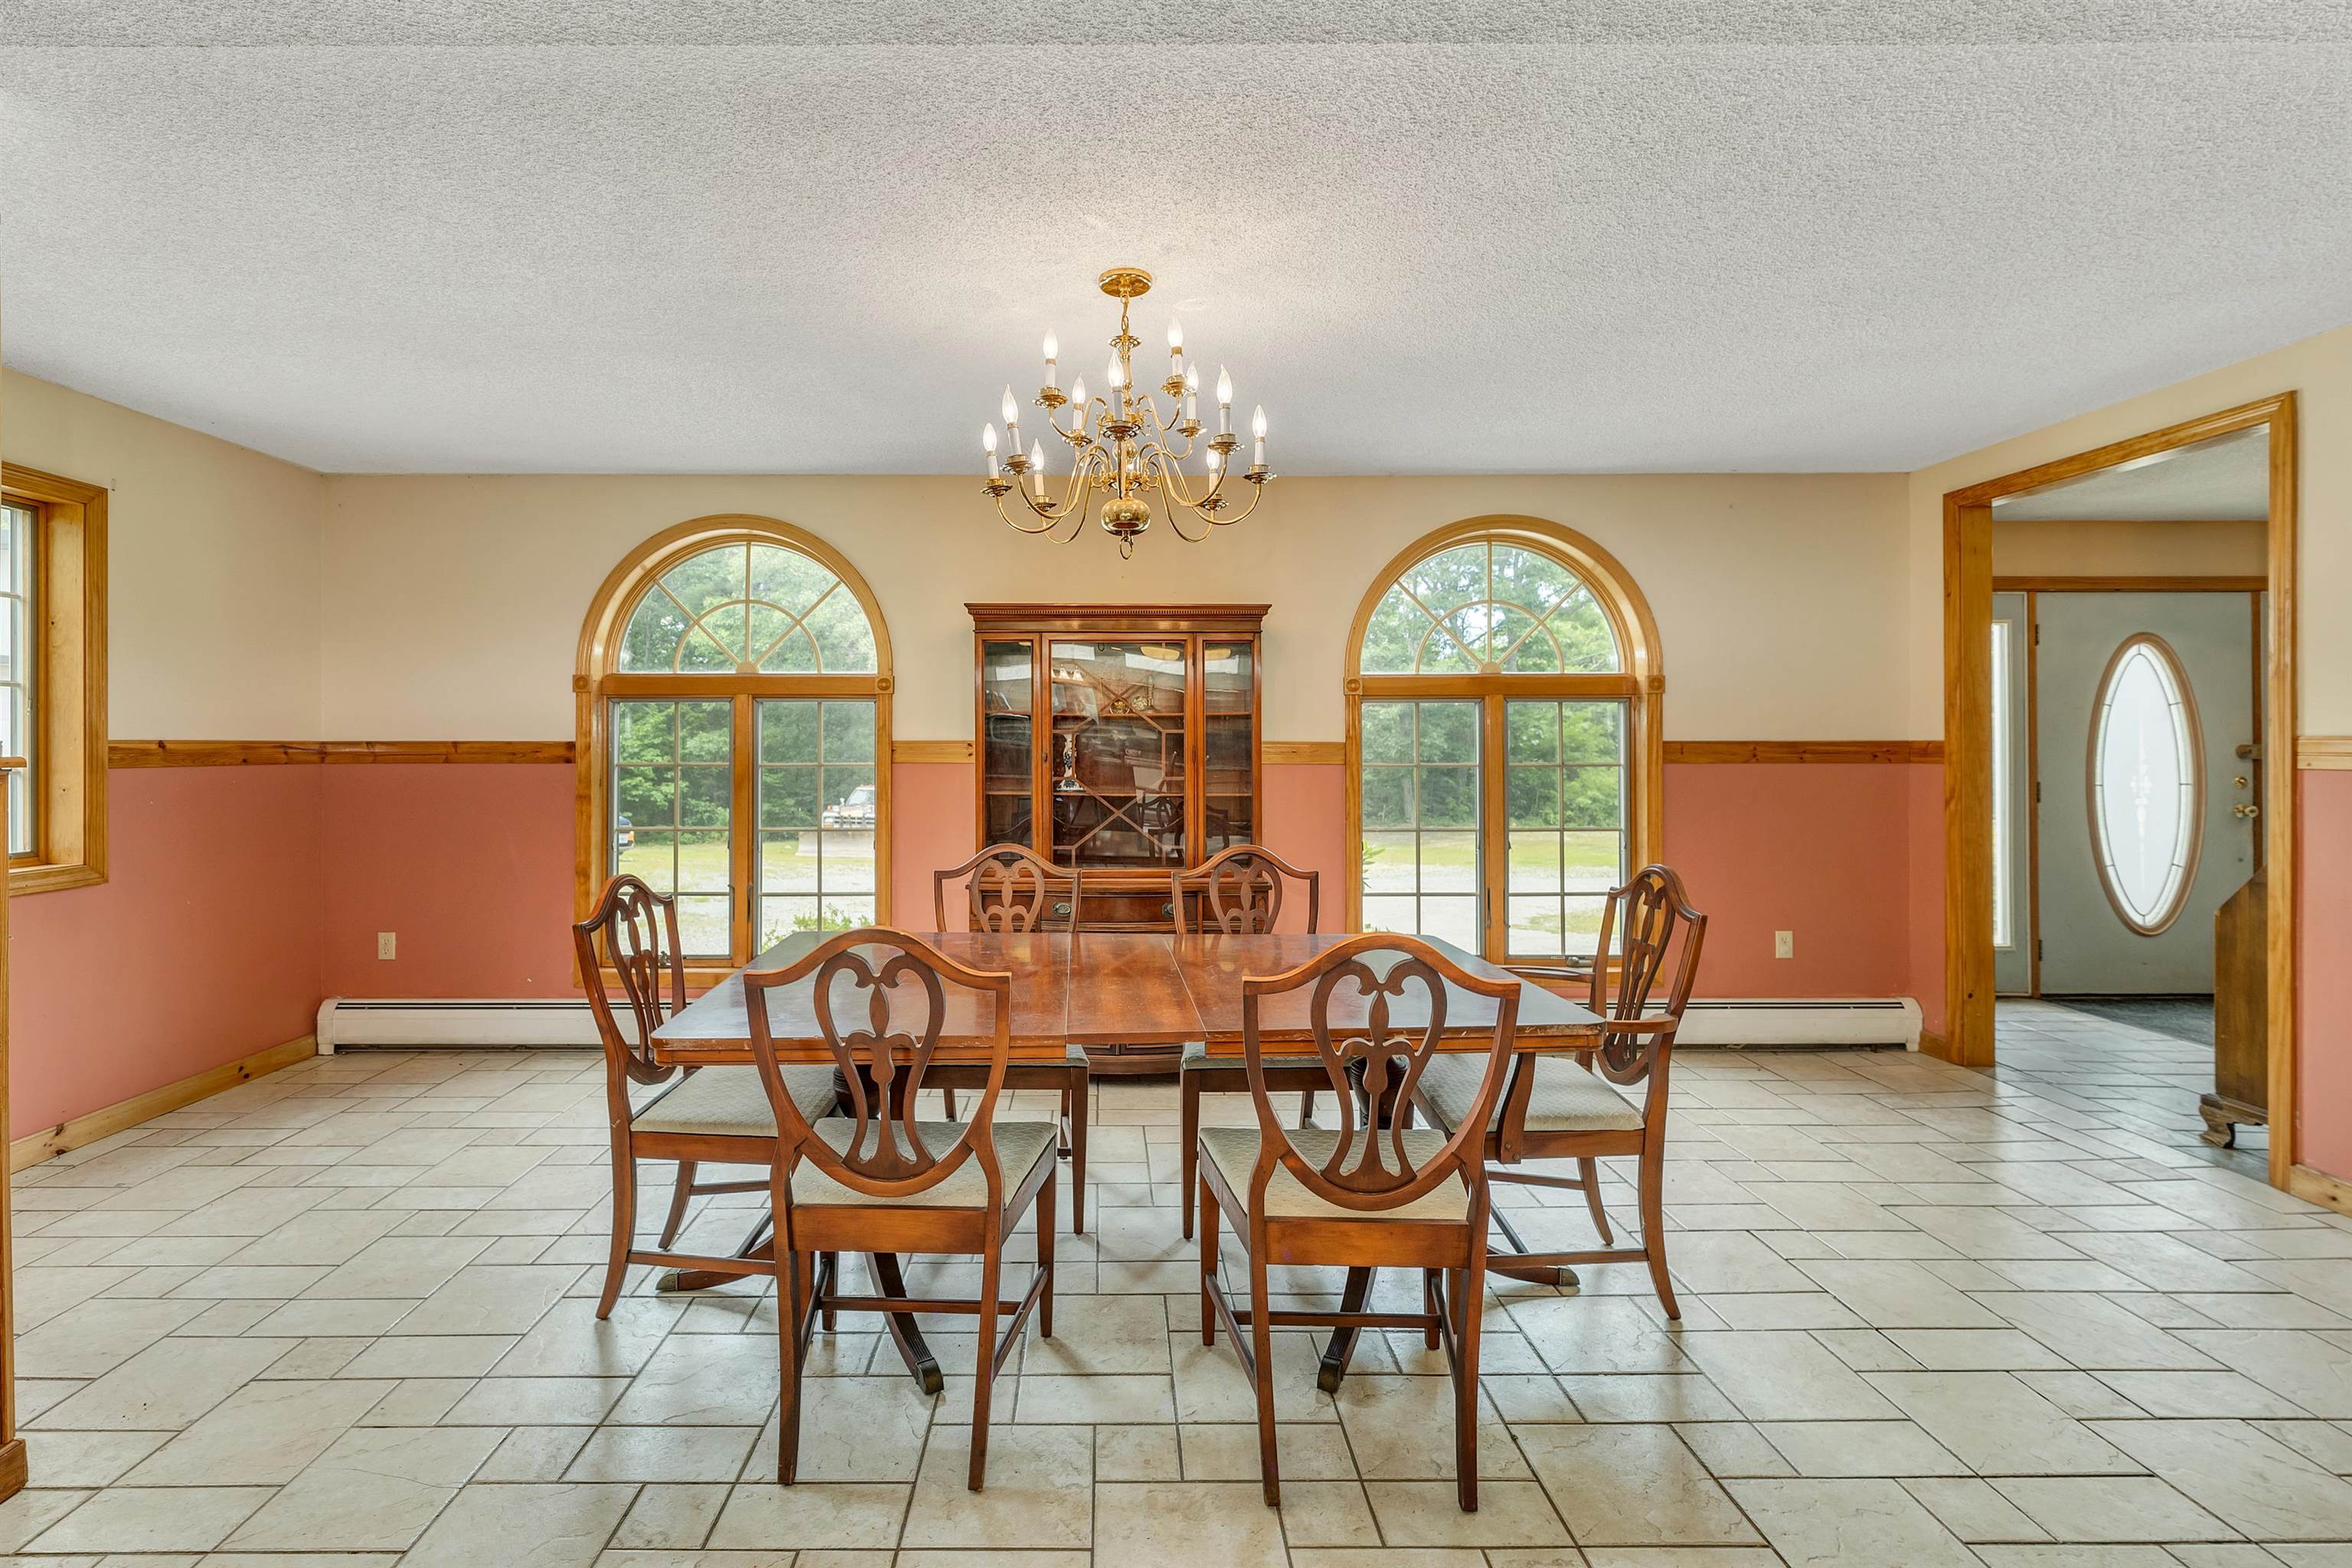 Also a large granite island for cooking up a feast or having breakfast or a snack. A large walk-in pantry is great for hiding extra cookware or food stuffs.